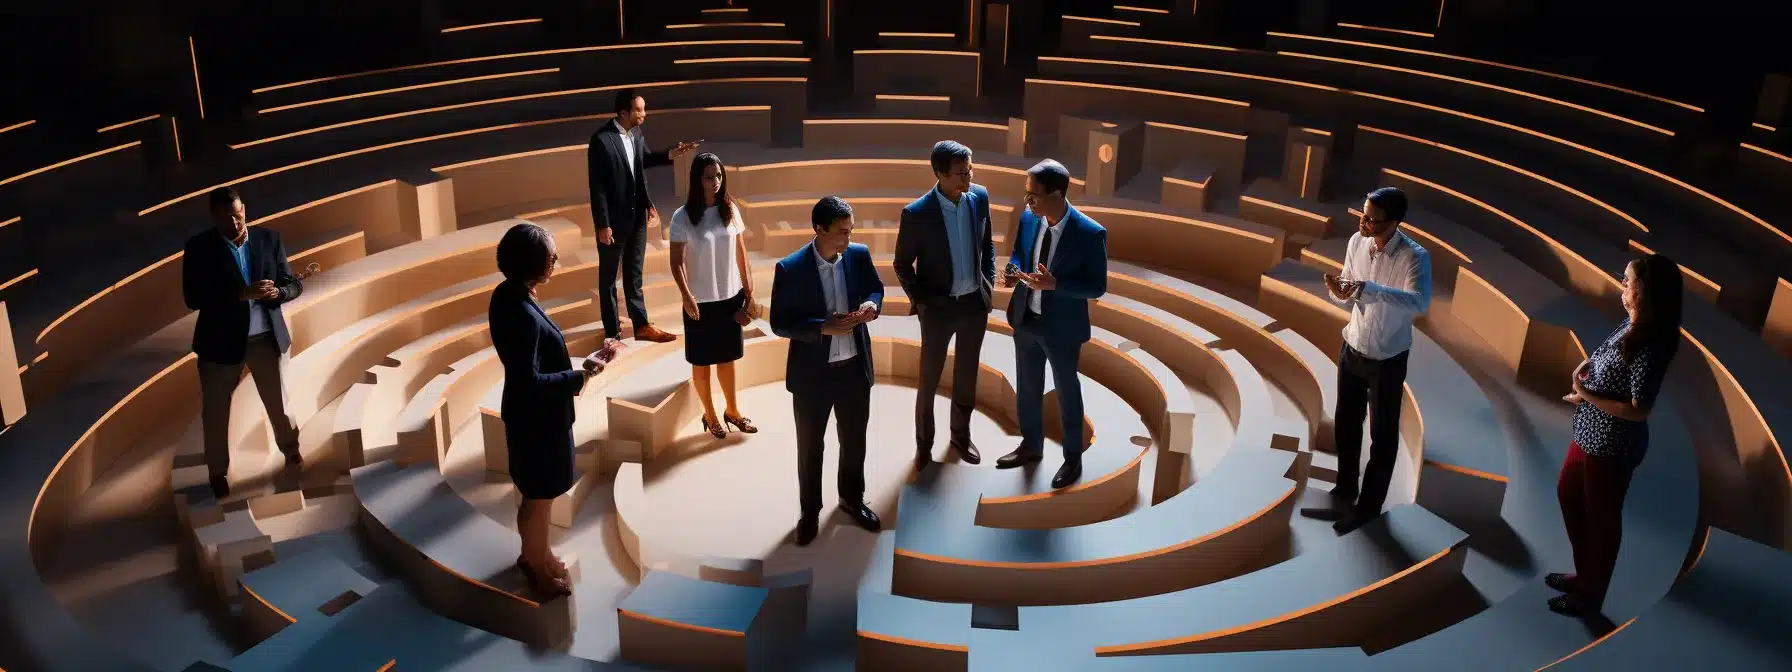 Leadership Team Navigating A Complex Labyrinth To Shape The Work Environment In Reflection Of The Brand'S Vision.